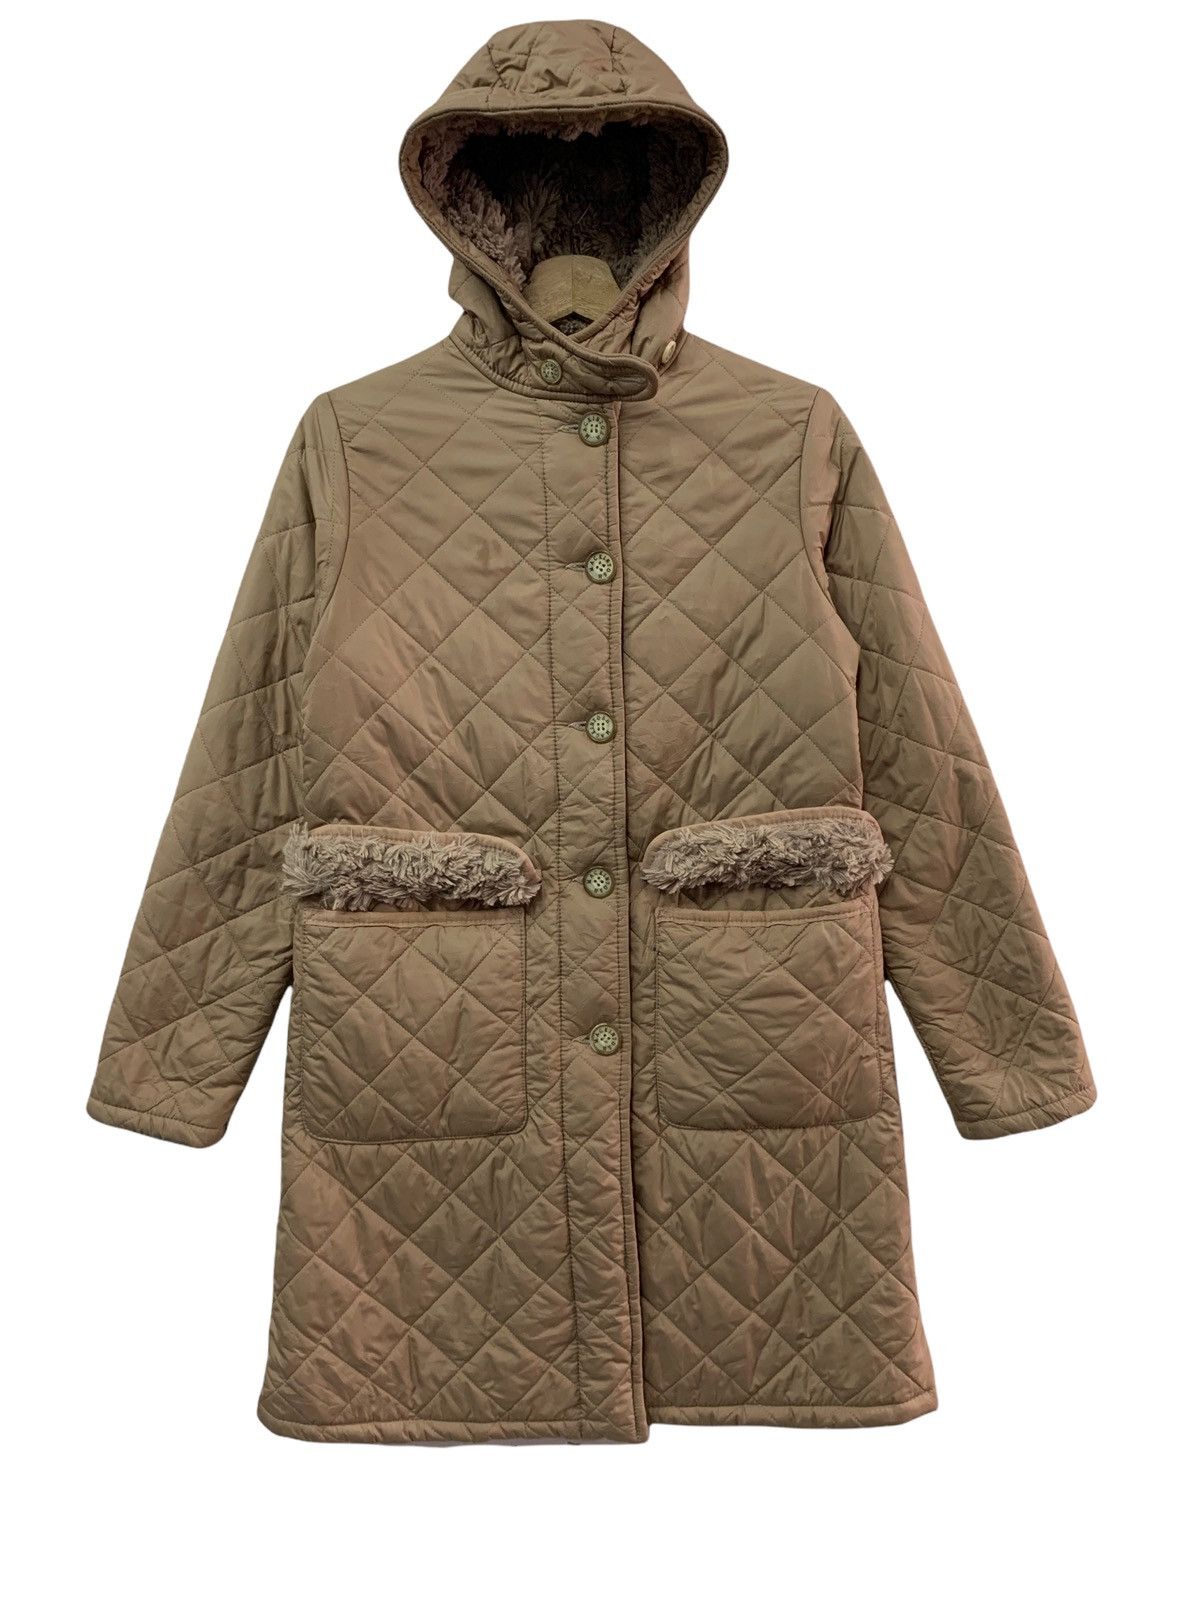 🔥MACKINTOSH SCOTLAND QUILTED FUR LINED LONG JACKETS - 3